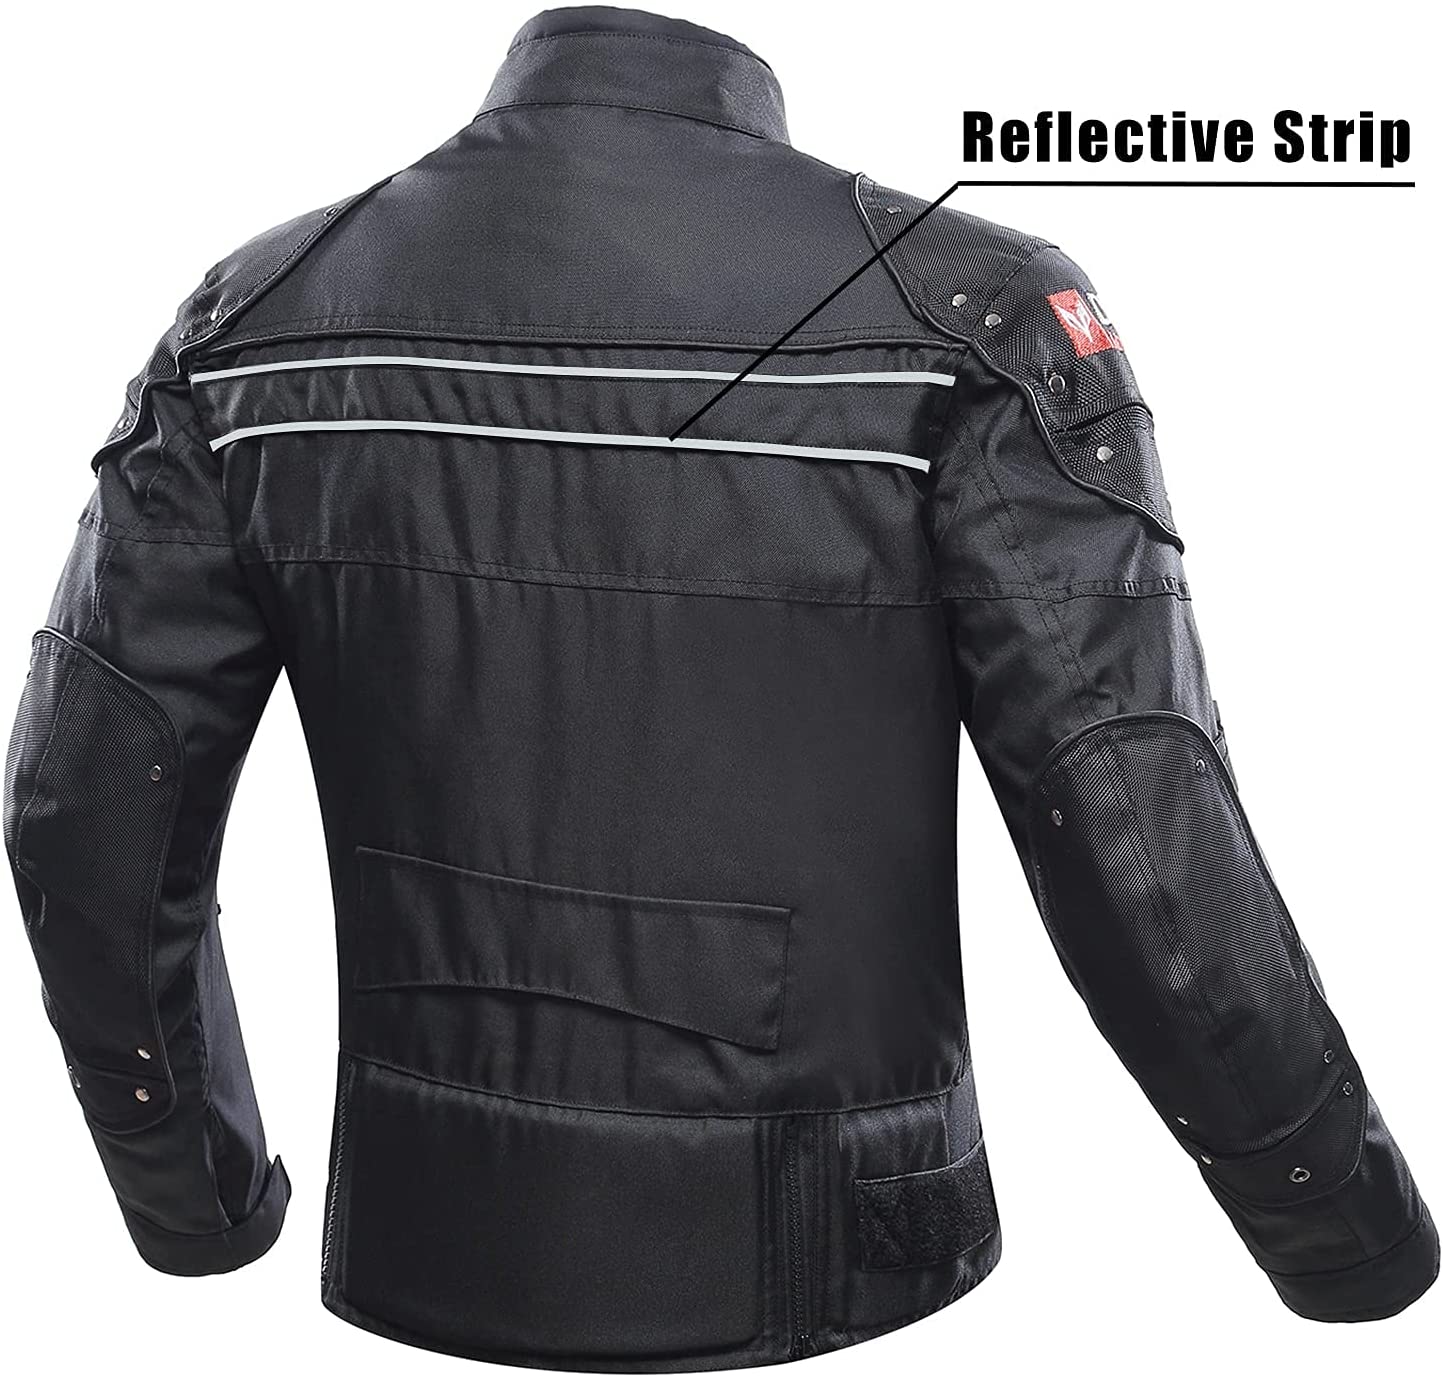 FidgetGear Safety Anti-Fall Motorcycle Racing Suit Protective Armor Full  Jacket Bulletproof Shirt Protective Gear for Roller Skating Riding Skiing  Black XXXXL Outdoor Supplies : Amazon.in: Car & Motorbike